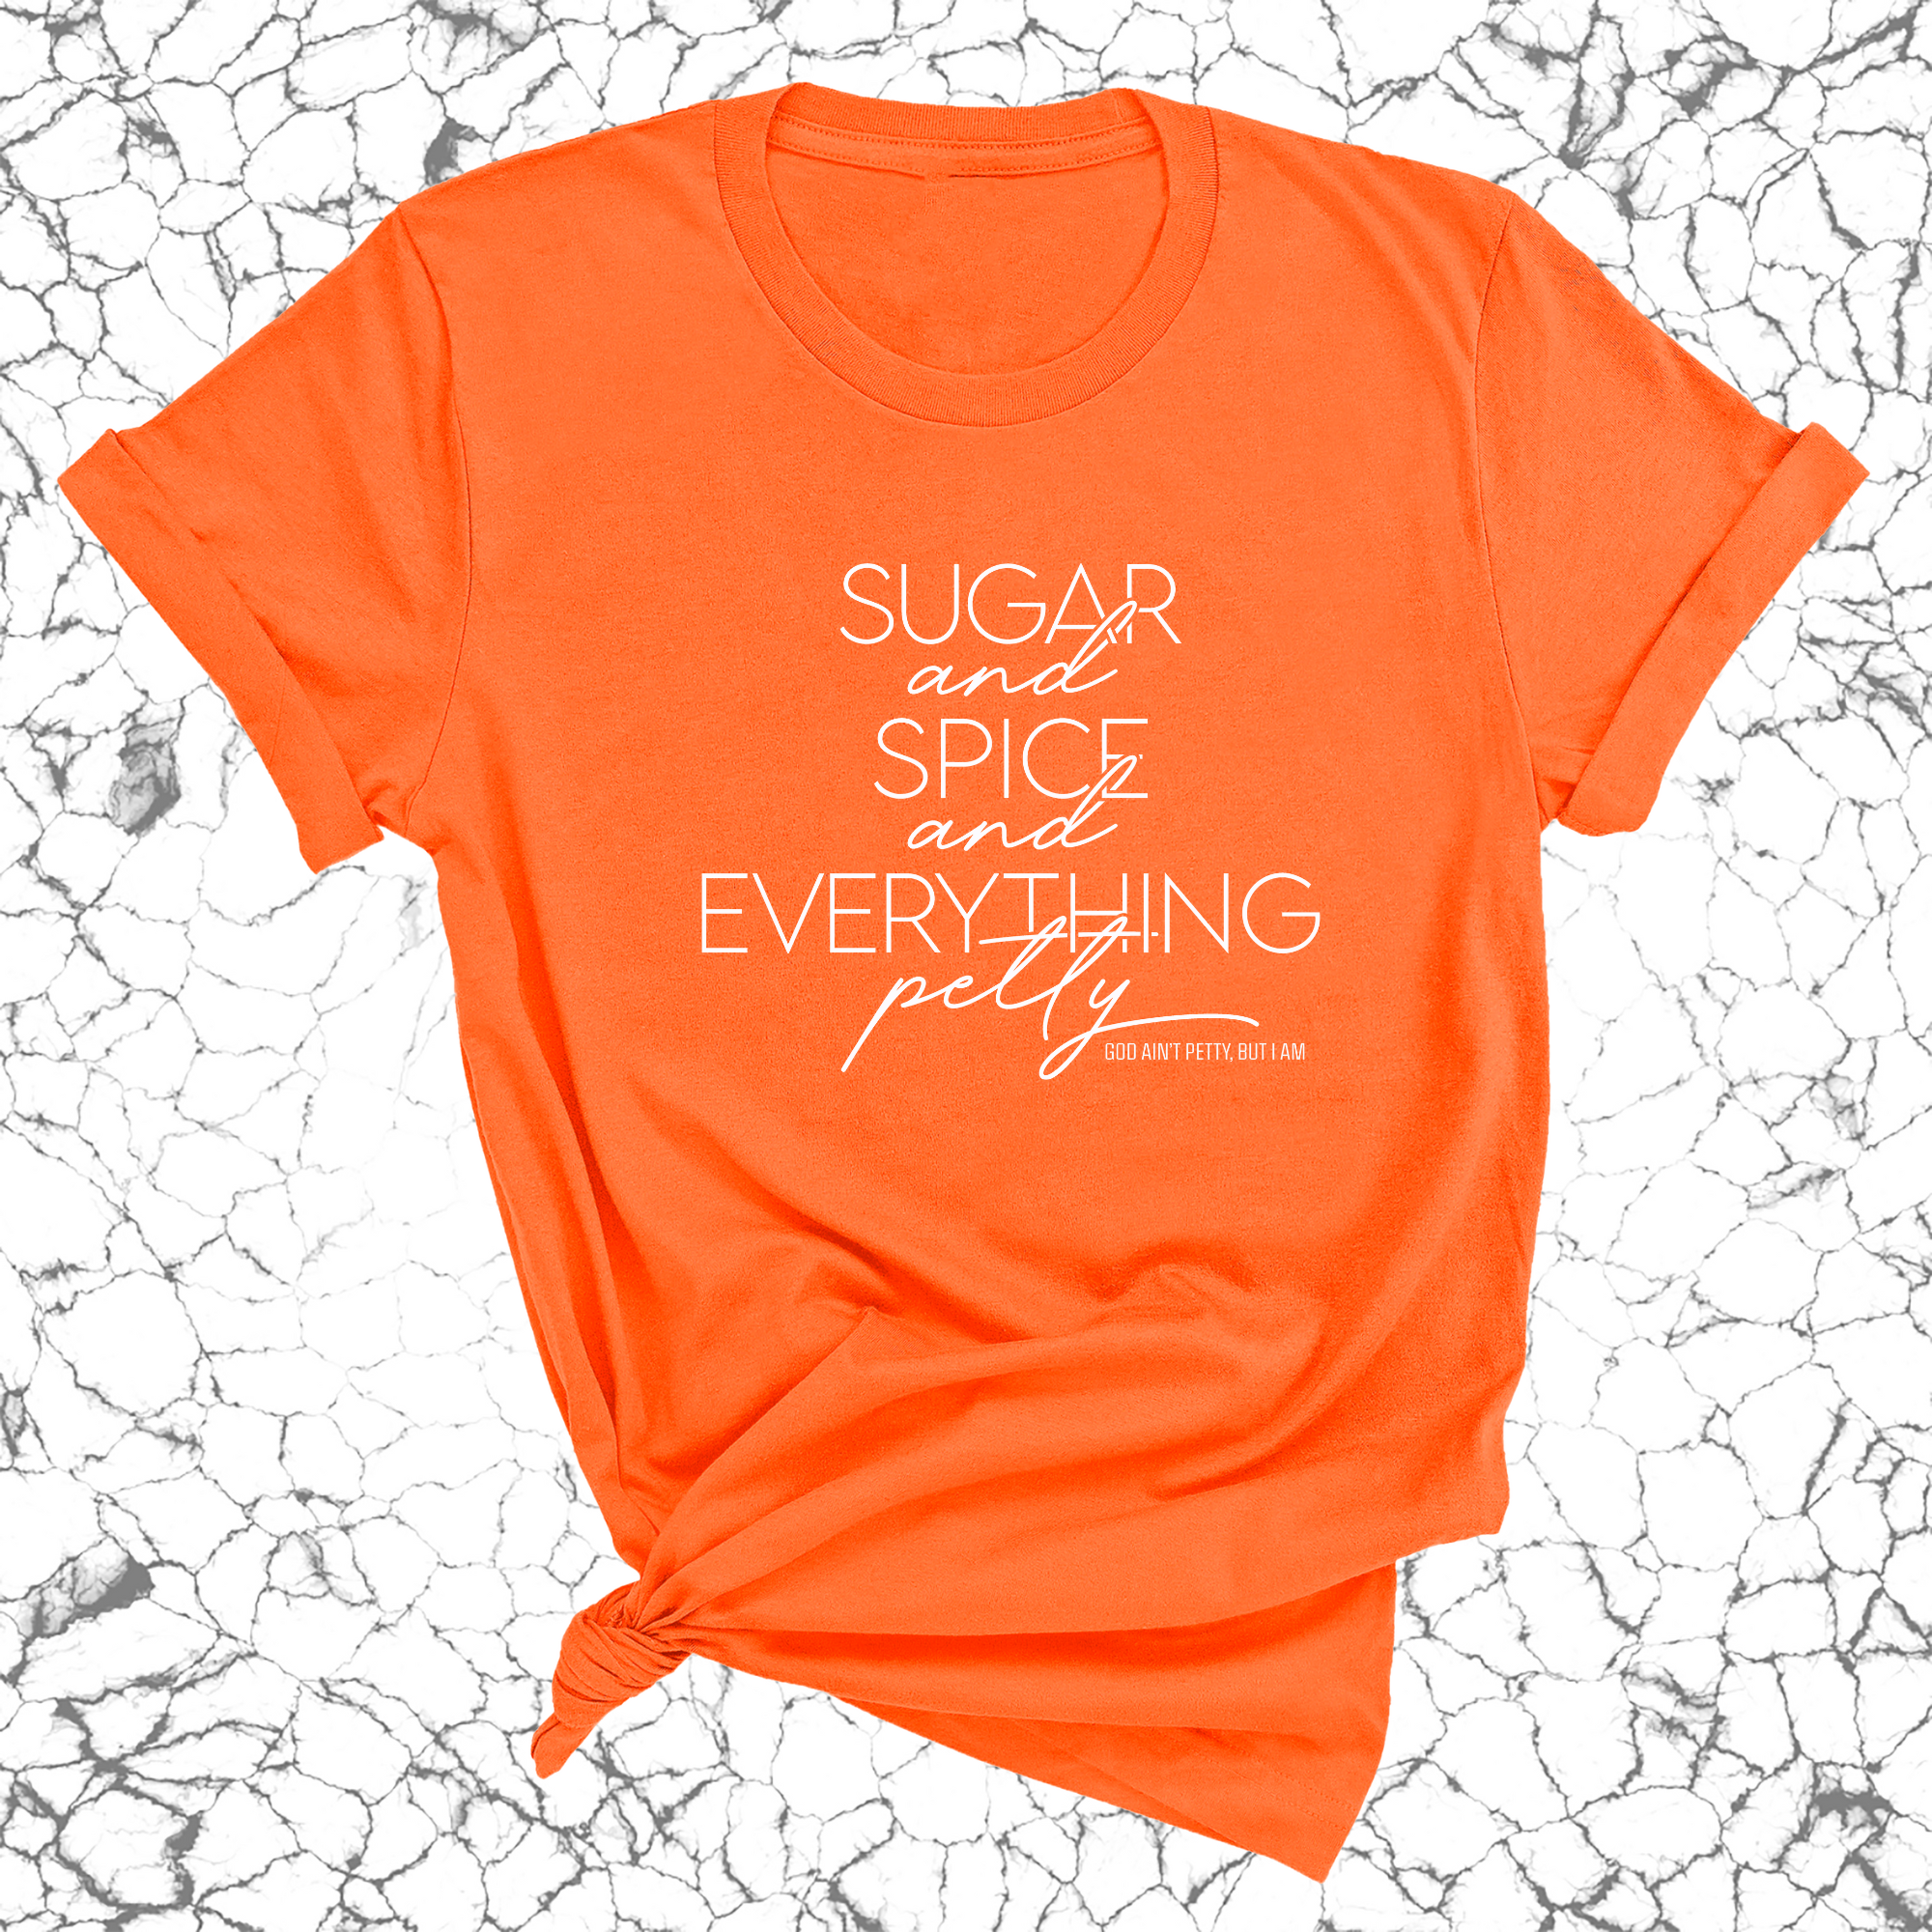 Sugar and Spice and Everything petty Unisex Tee-T-Shirt-The Original God Ain't Petty But I Am